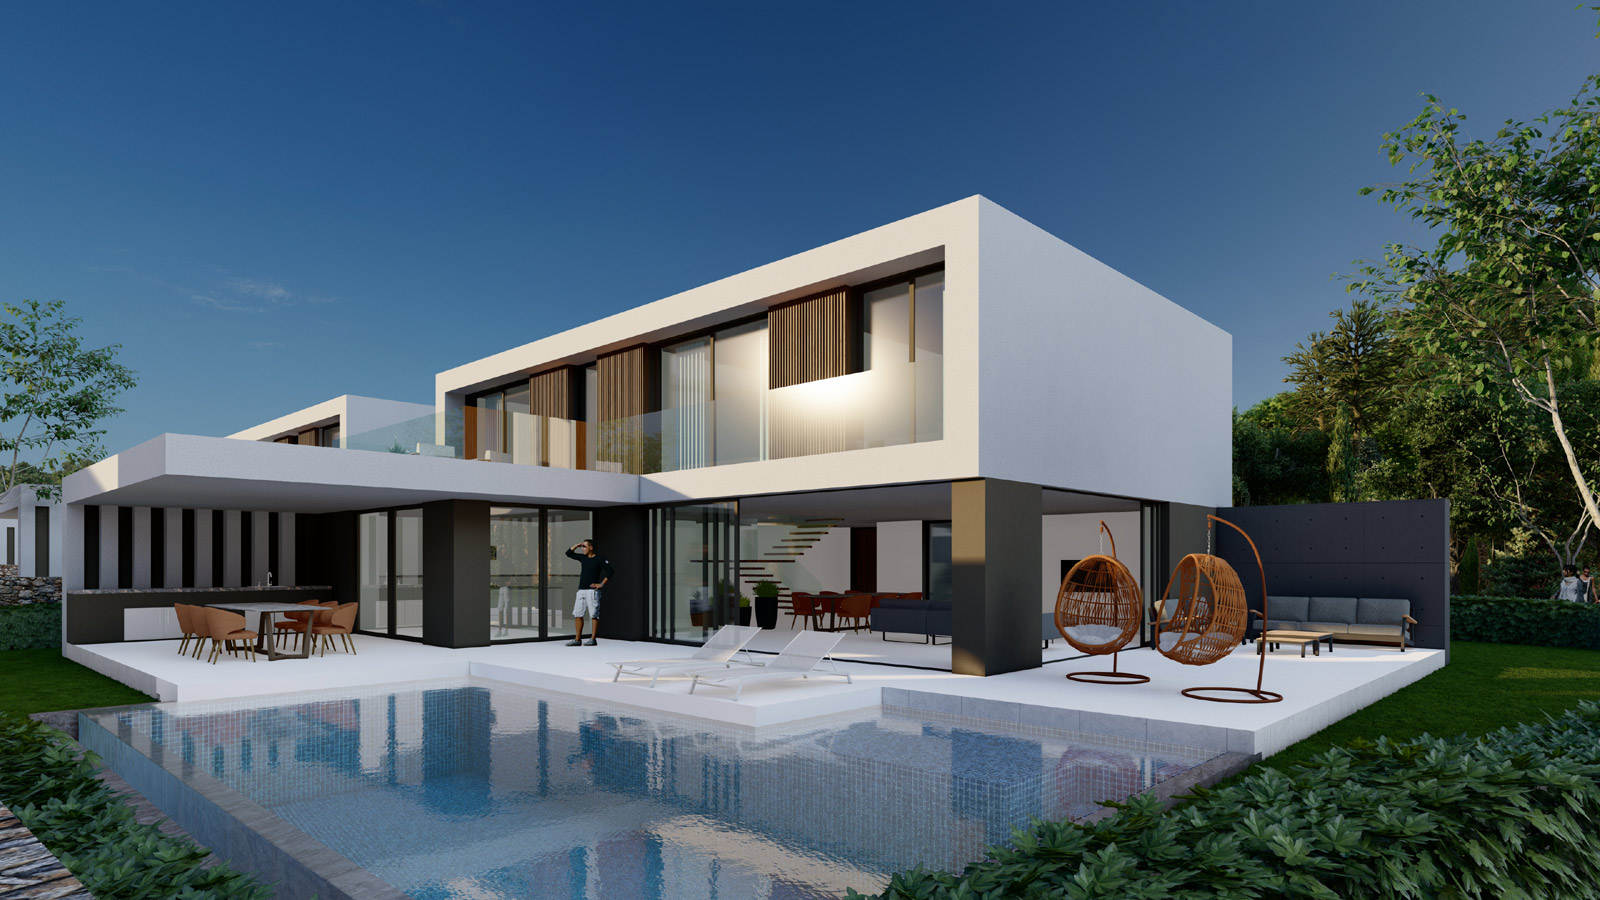 Spectacular 4 Bedroom Villa with A Private Pool and 150m from A Secluded Beach from £799,000